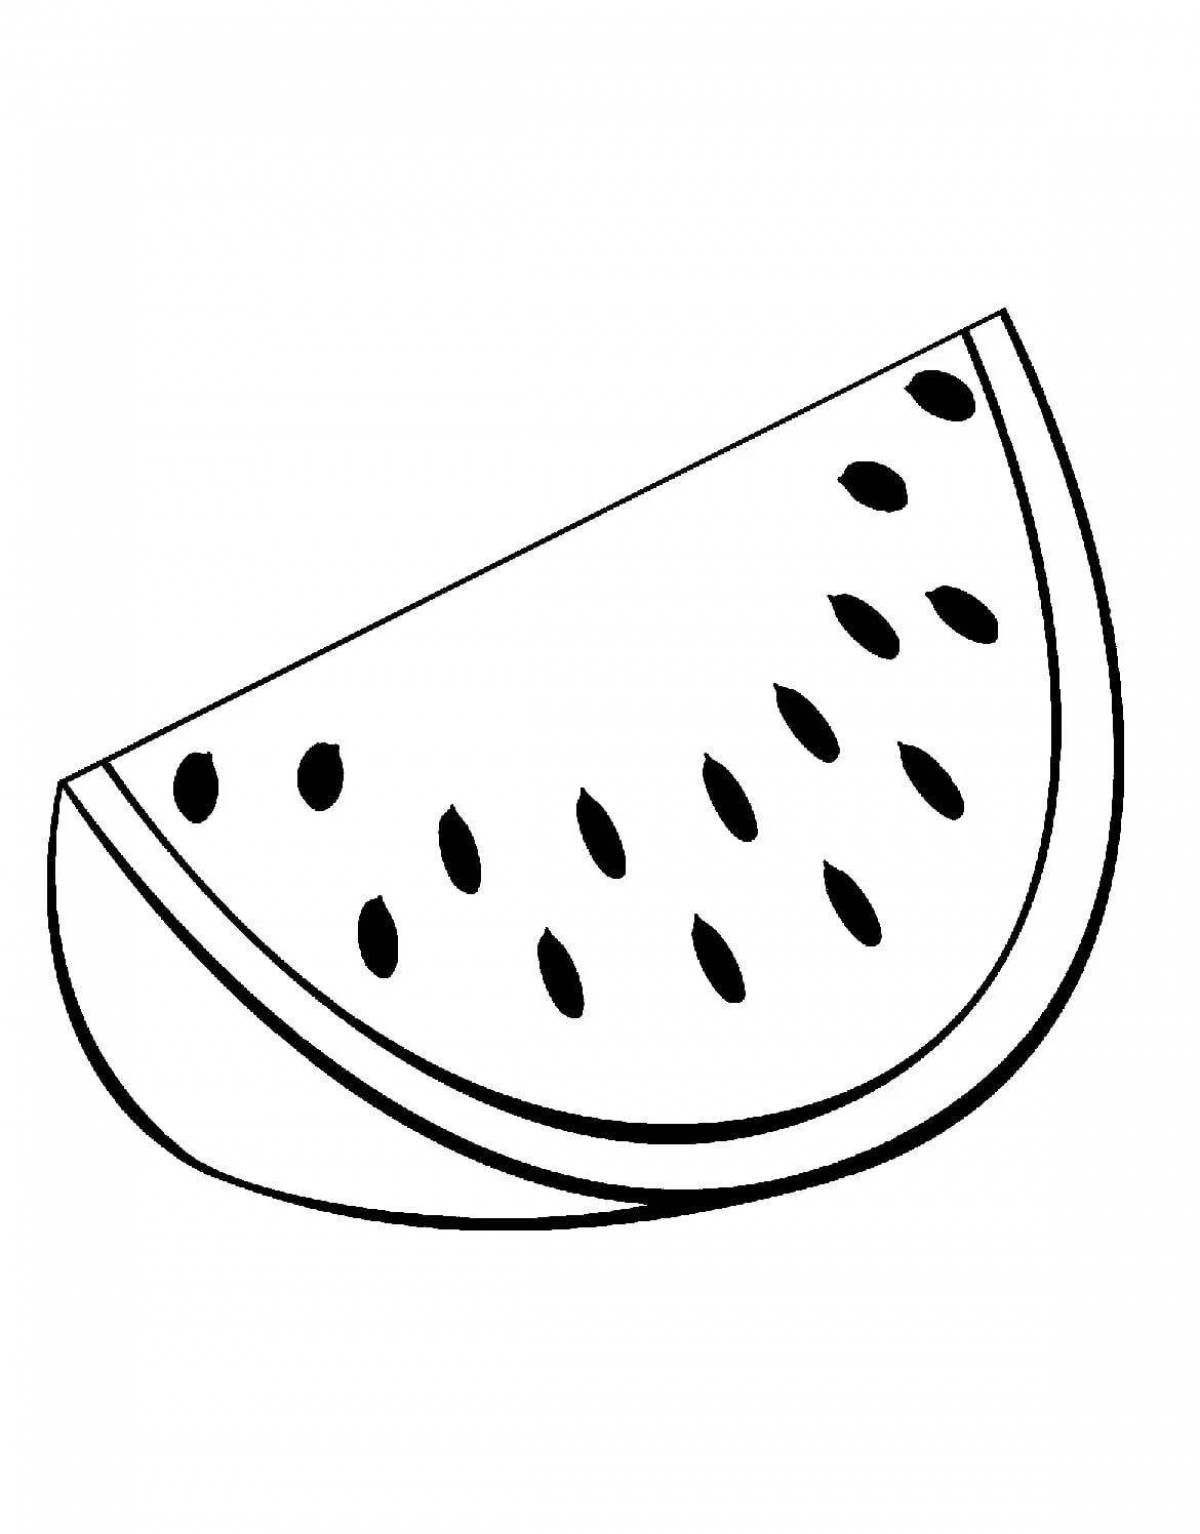 Coloring page festive watermelon wedge